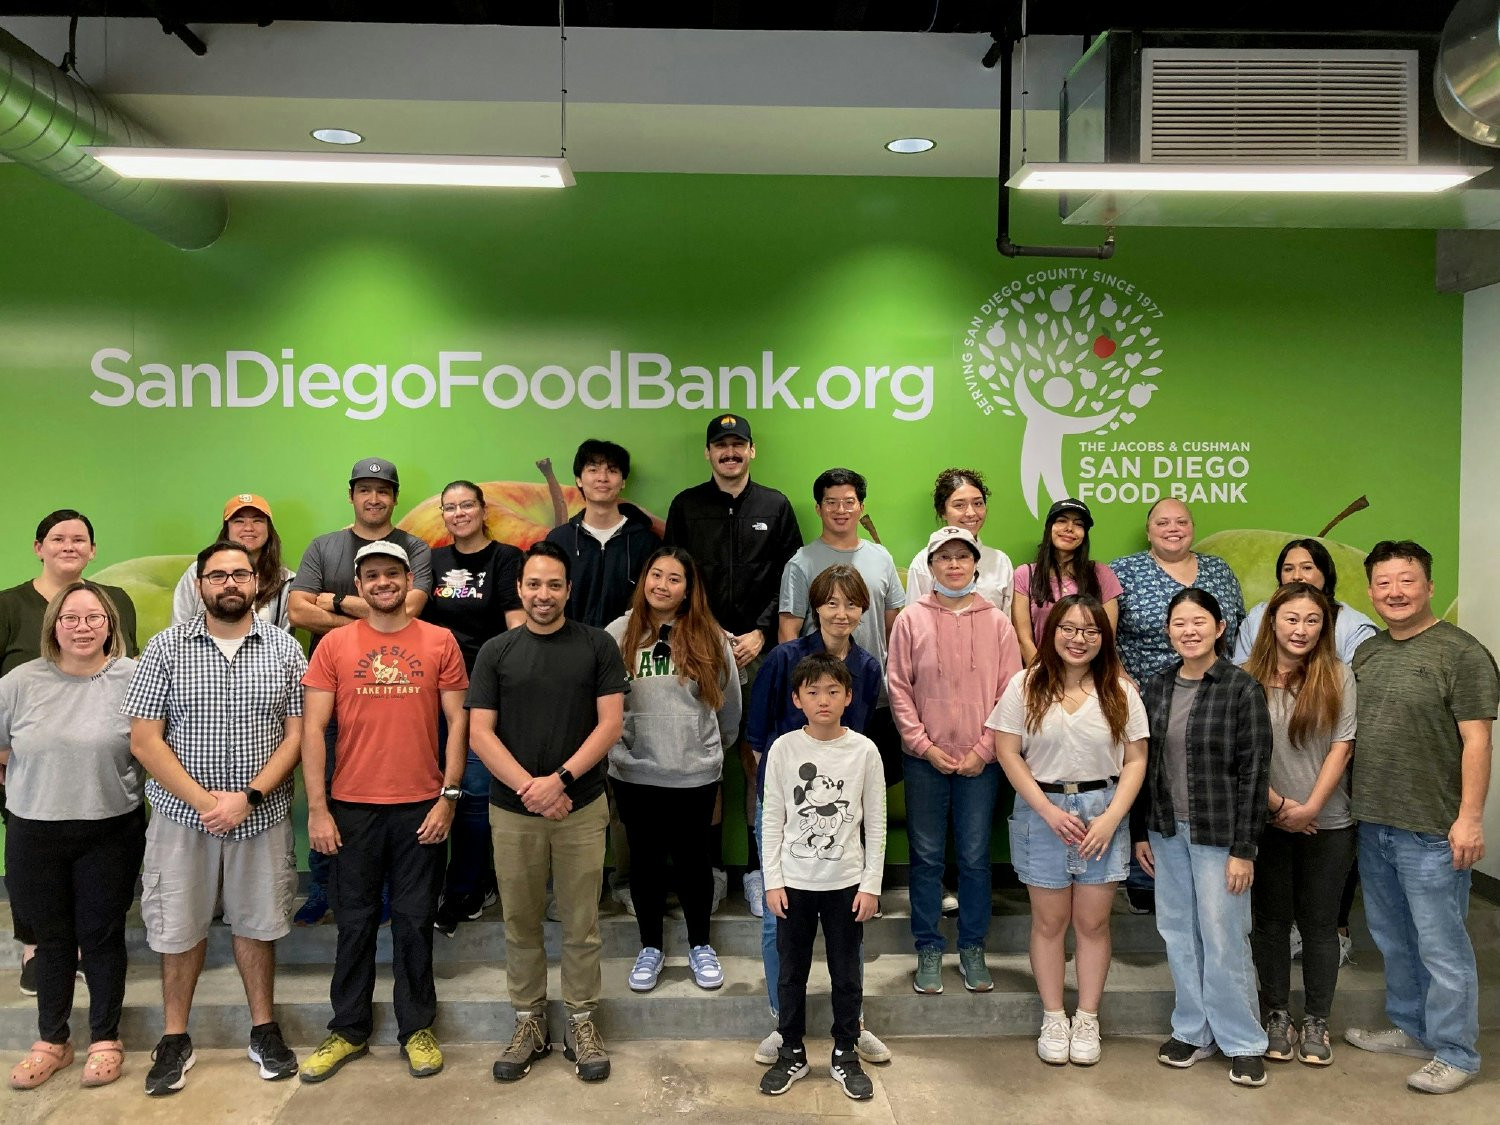 TEAM MEMBERS AND GUESTS VOLUNTEER AT THE SAN DIEGO FOOD BANK AND ASSIST WITH FOOD SORTING AND MEAL PACKAGE ASSEMBLY.